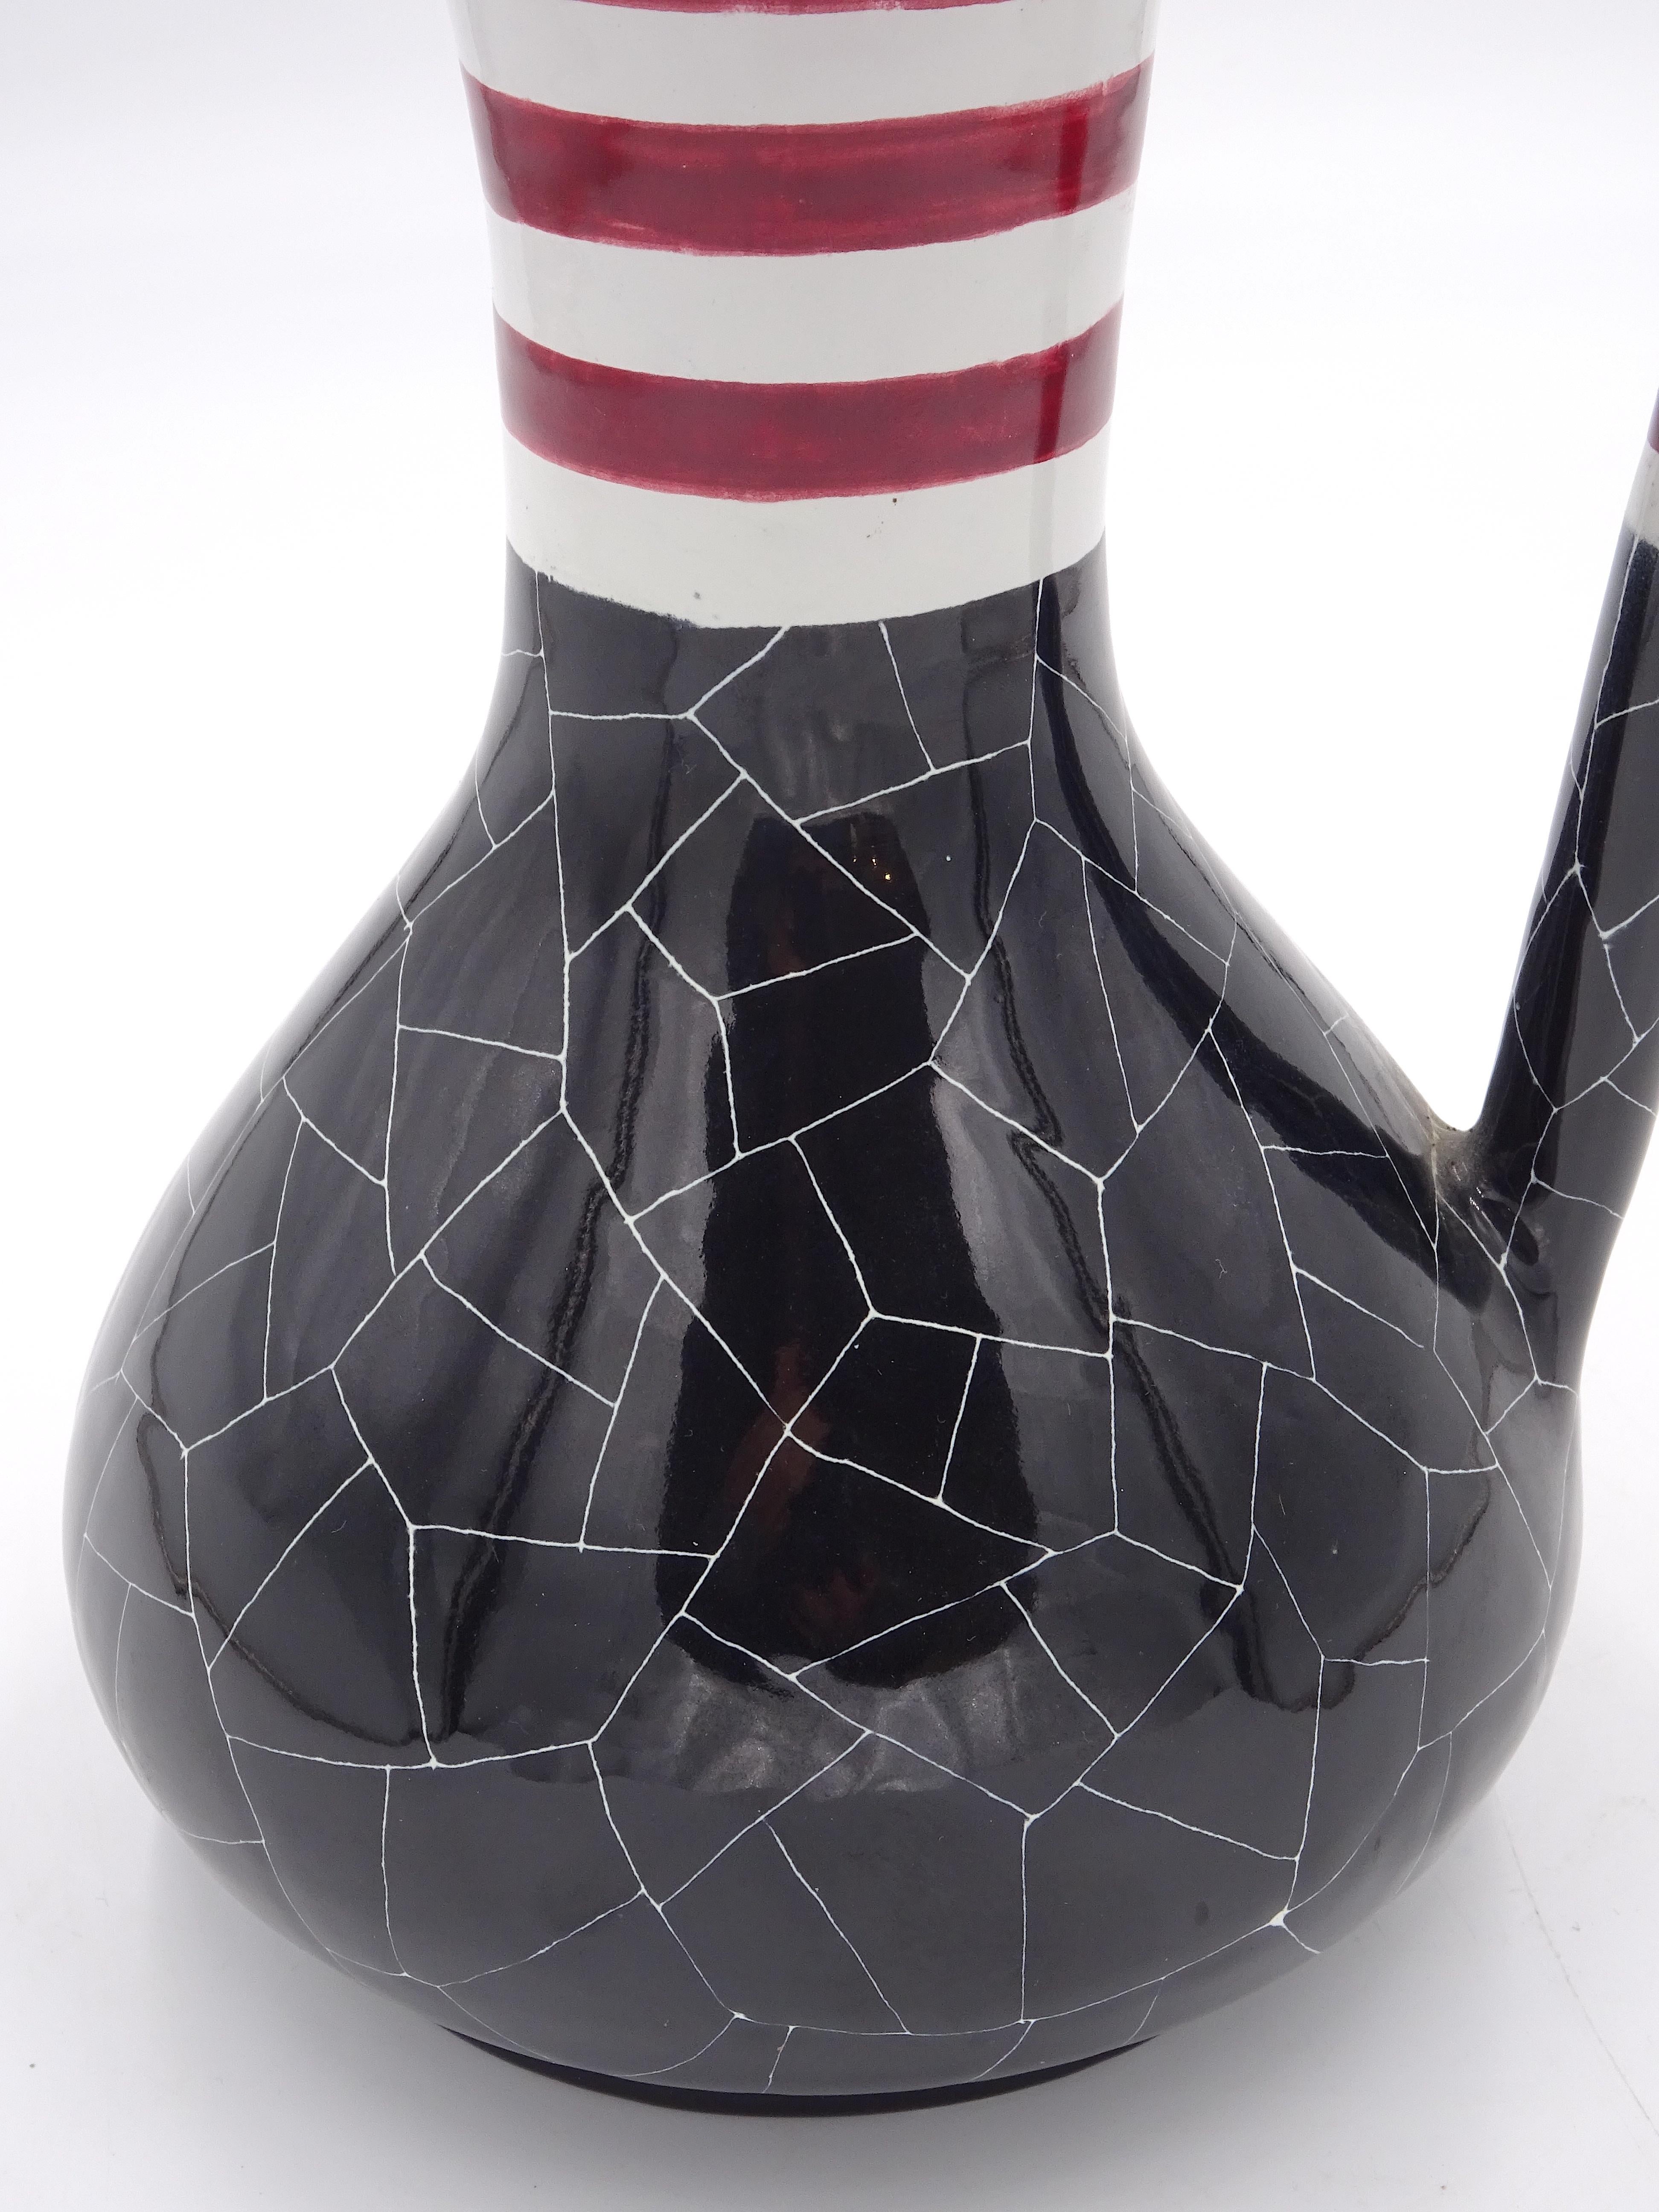 Pitcher made of ceramic by the Venetian manufacture San Polo around 1950s. The pitcher is black in color but distinguished by distinctive white veining, there is also a banded decoration on the neck of the pitcher and du part of the handle in red